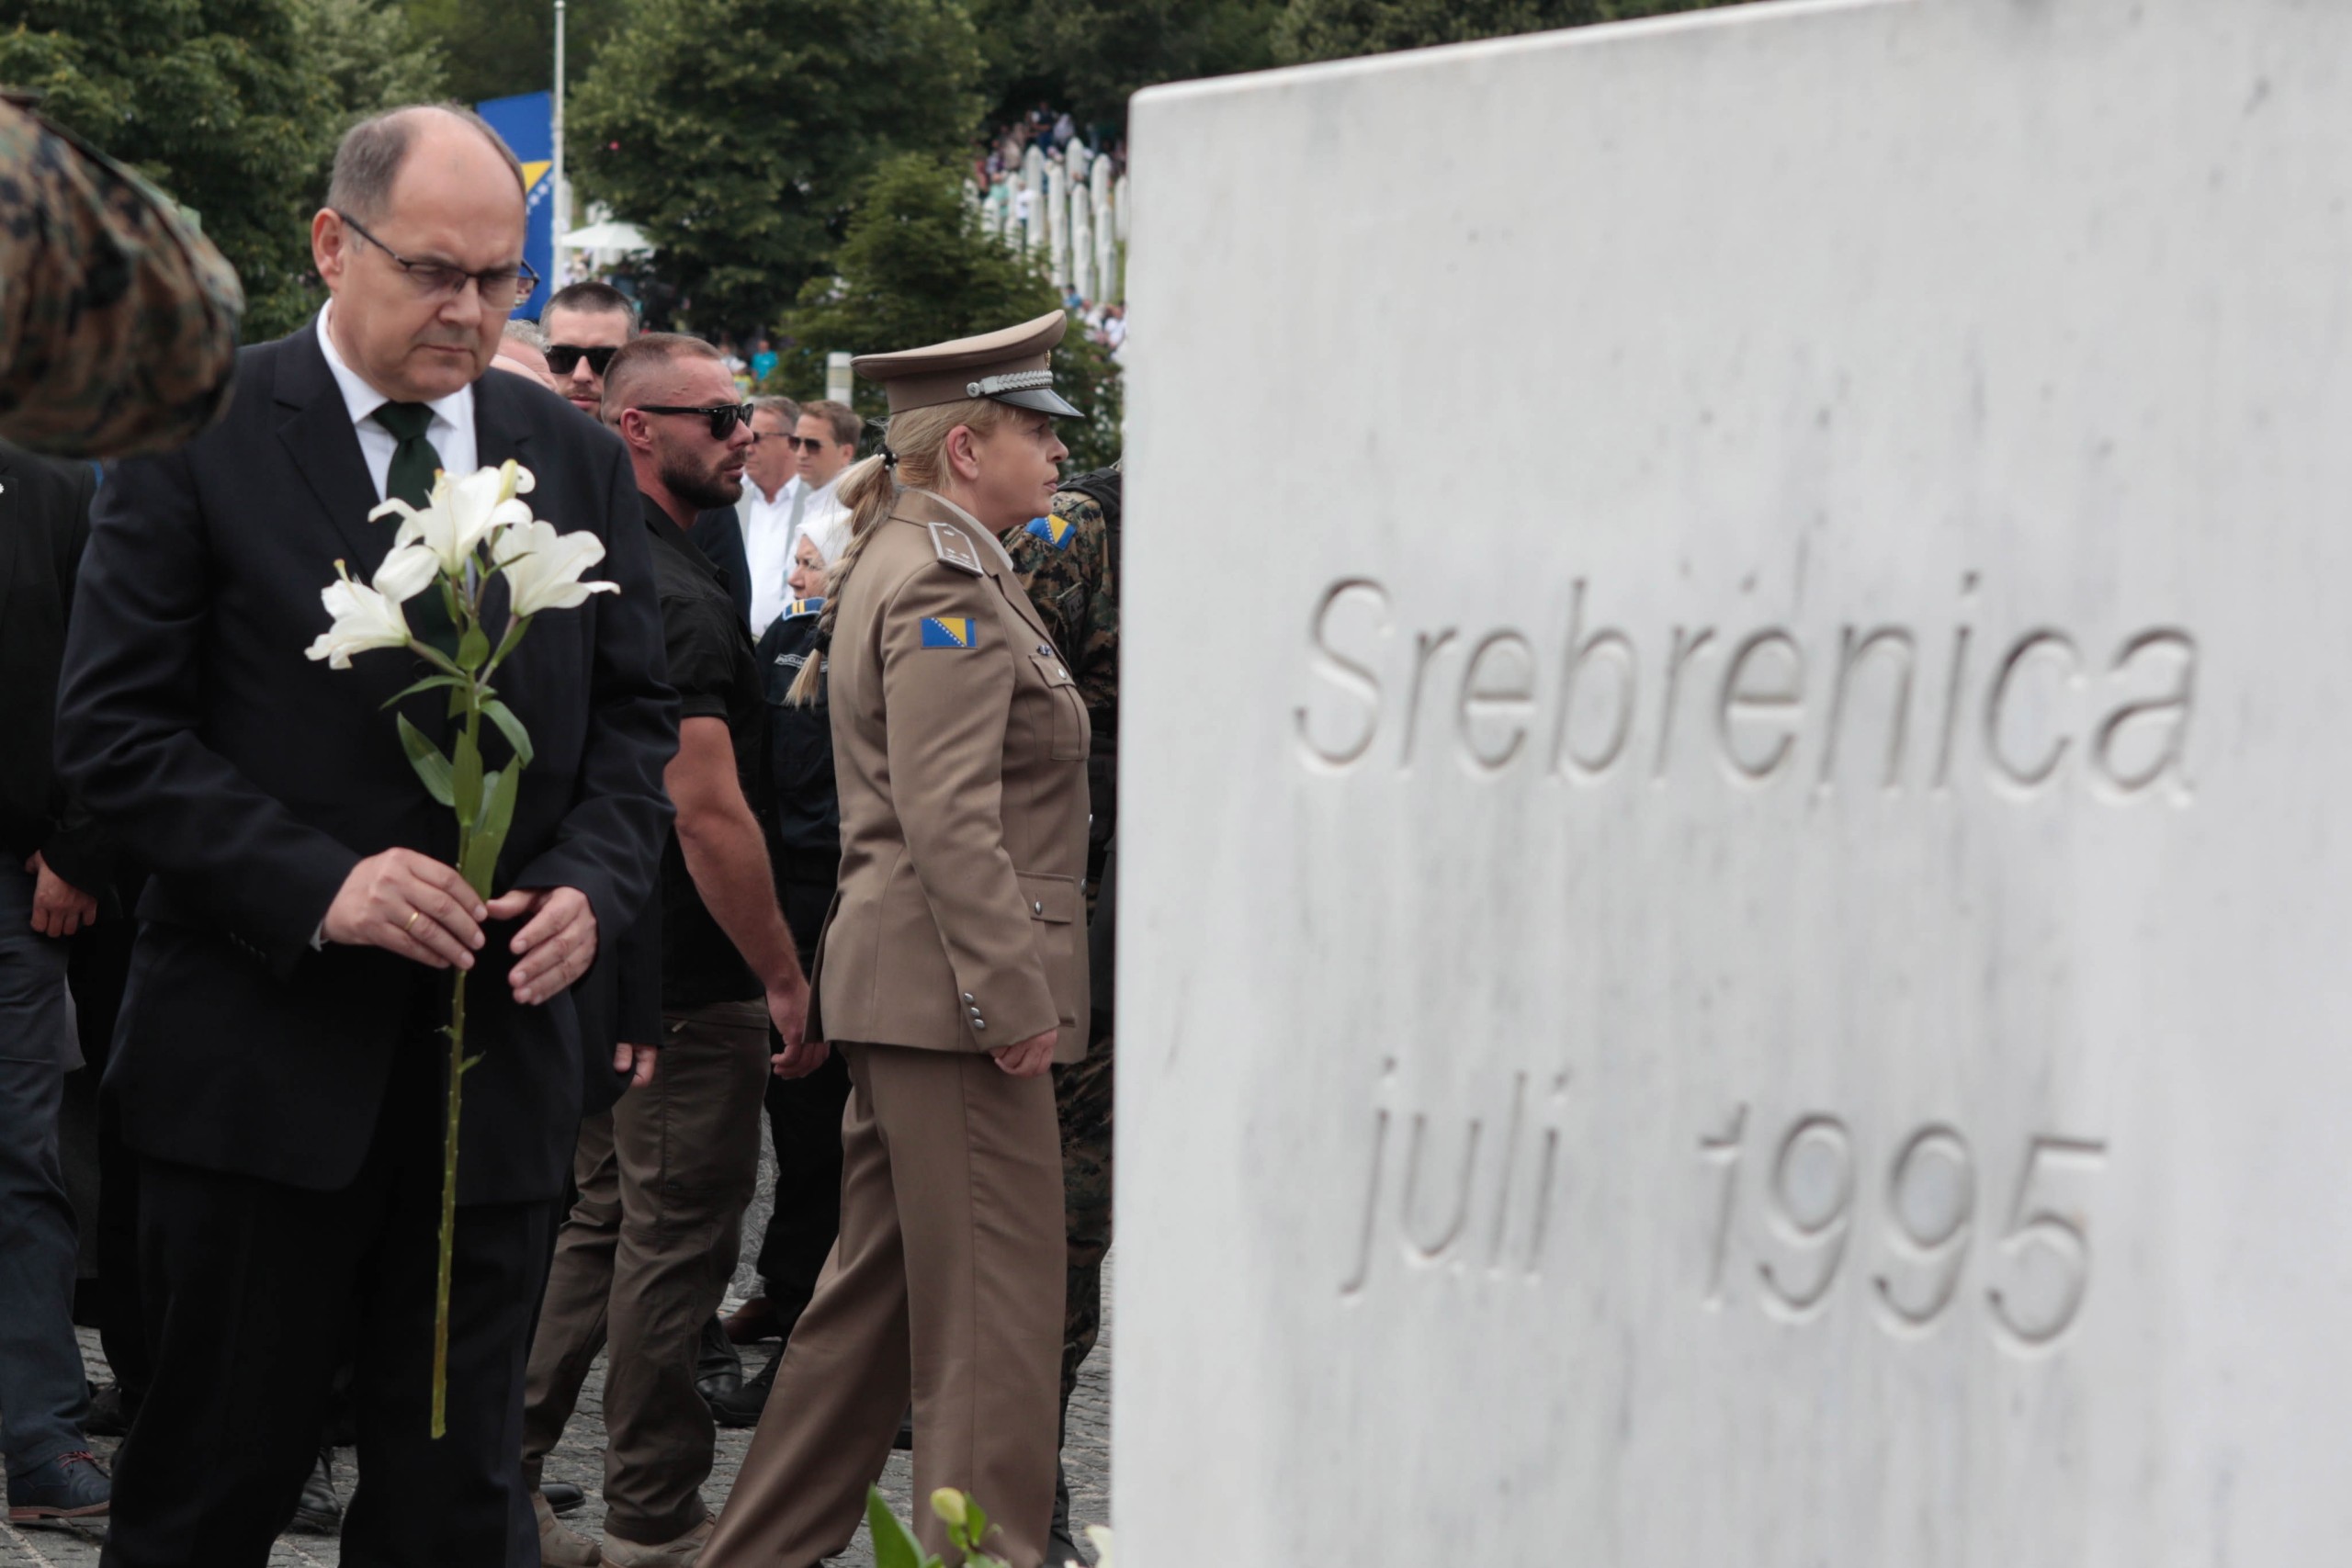 epa10065057 The High Representative and EU Special Representative in Bosnia and Herzegovina, German diplomat Christian Schmidt lays flowers at Potocari Memorial Center during a funeral ceremony for fifty newly-identified Bosnian Muslim victims, at the Potocari Memorial Center and Cemetery in Srebrenica, Bosnia and Herzegovina, 11 July 2022. The burial was part of a memorial ceremony to mark the 27th anniversary of the Srebrenica genocide, considered the worst atrocity of Bosnia's 1992-95 war. More than 8,000 Muslim men and boys were executed in the 1995 killing spree after Bosnian Serb forces overran the town.  EPA/JASMIN BRUTUS